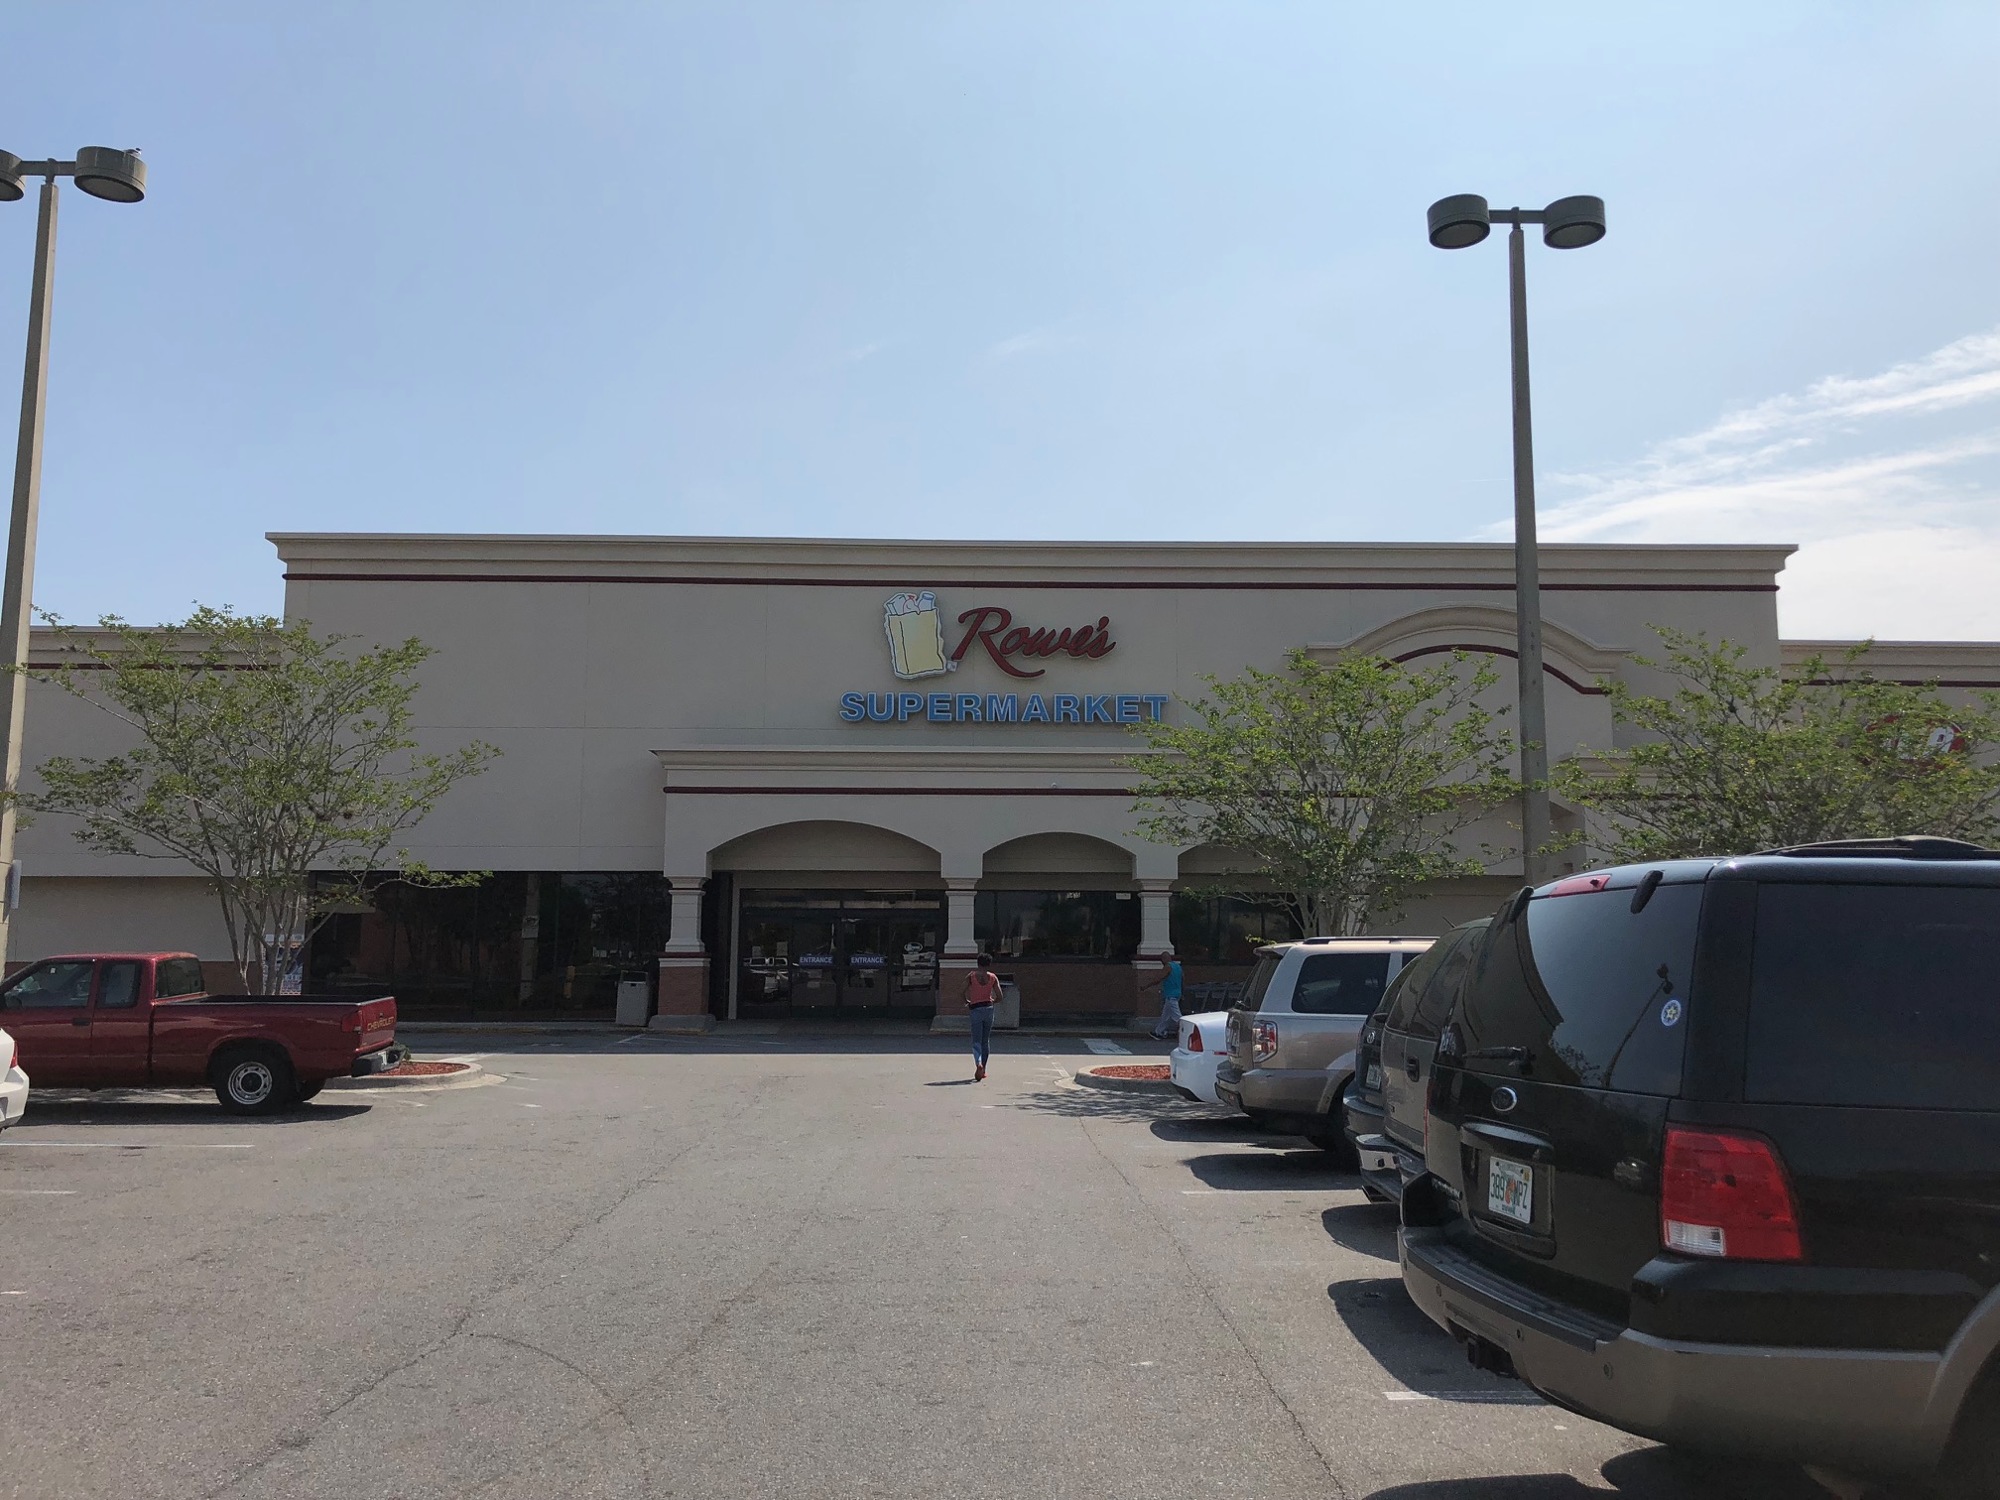 The Rowe’s IGA Supermarket at 5435 Blanding Blvd. was once an Albertsons.